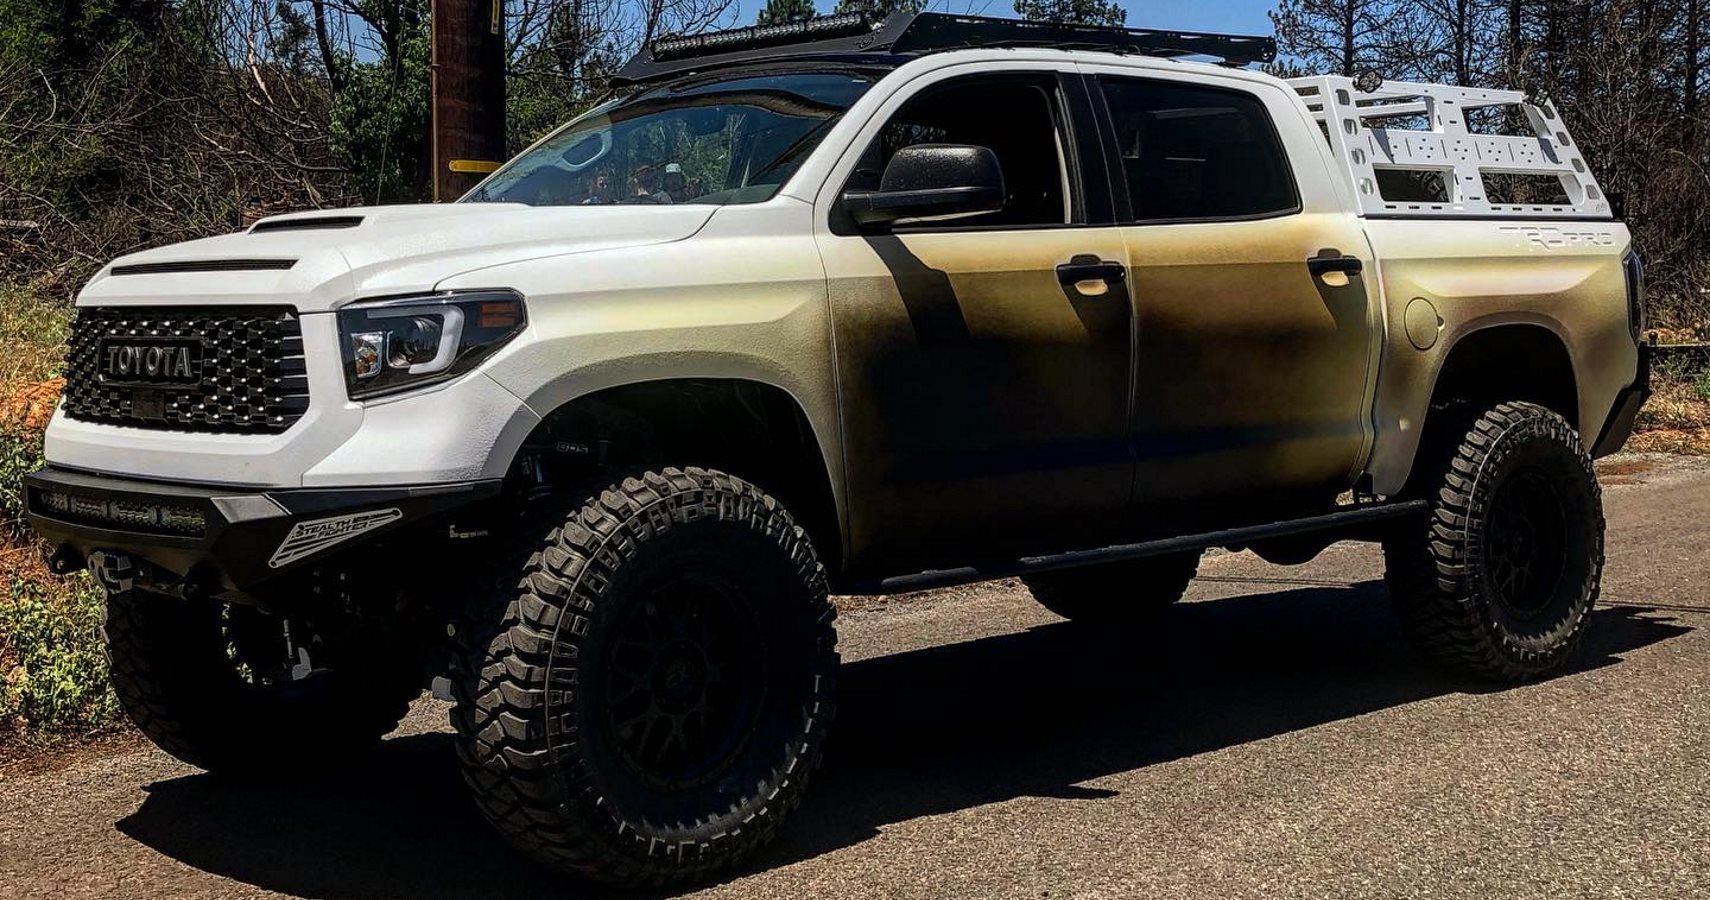 Hero Nurse From California Fire Gets New Tundra Customized, And The Results Are Blazing